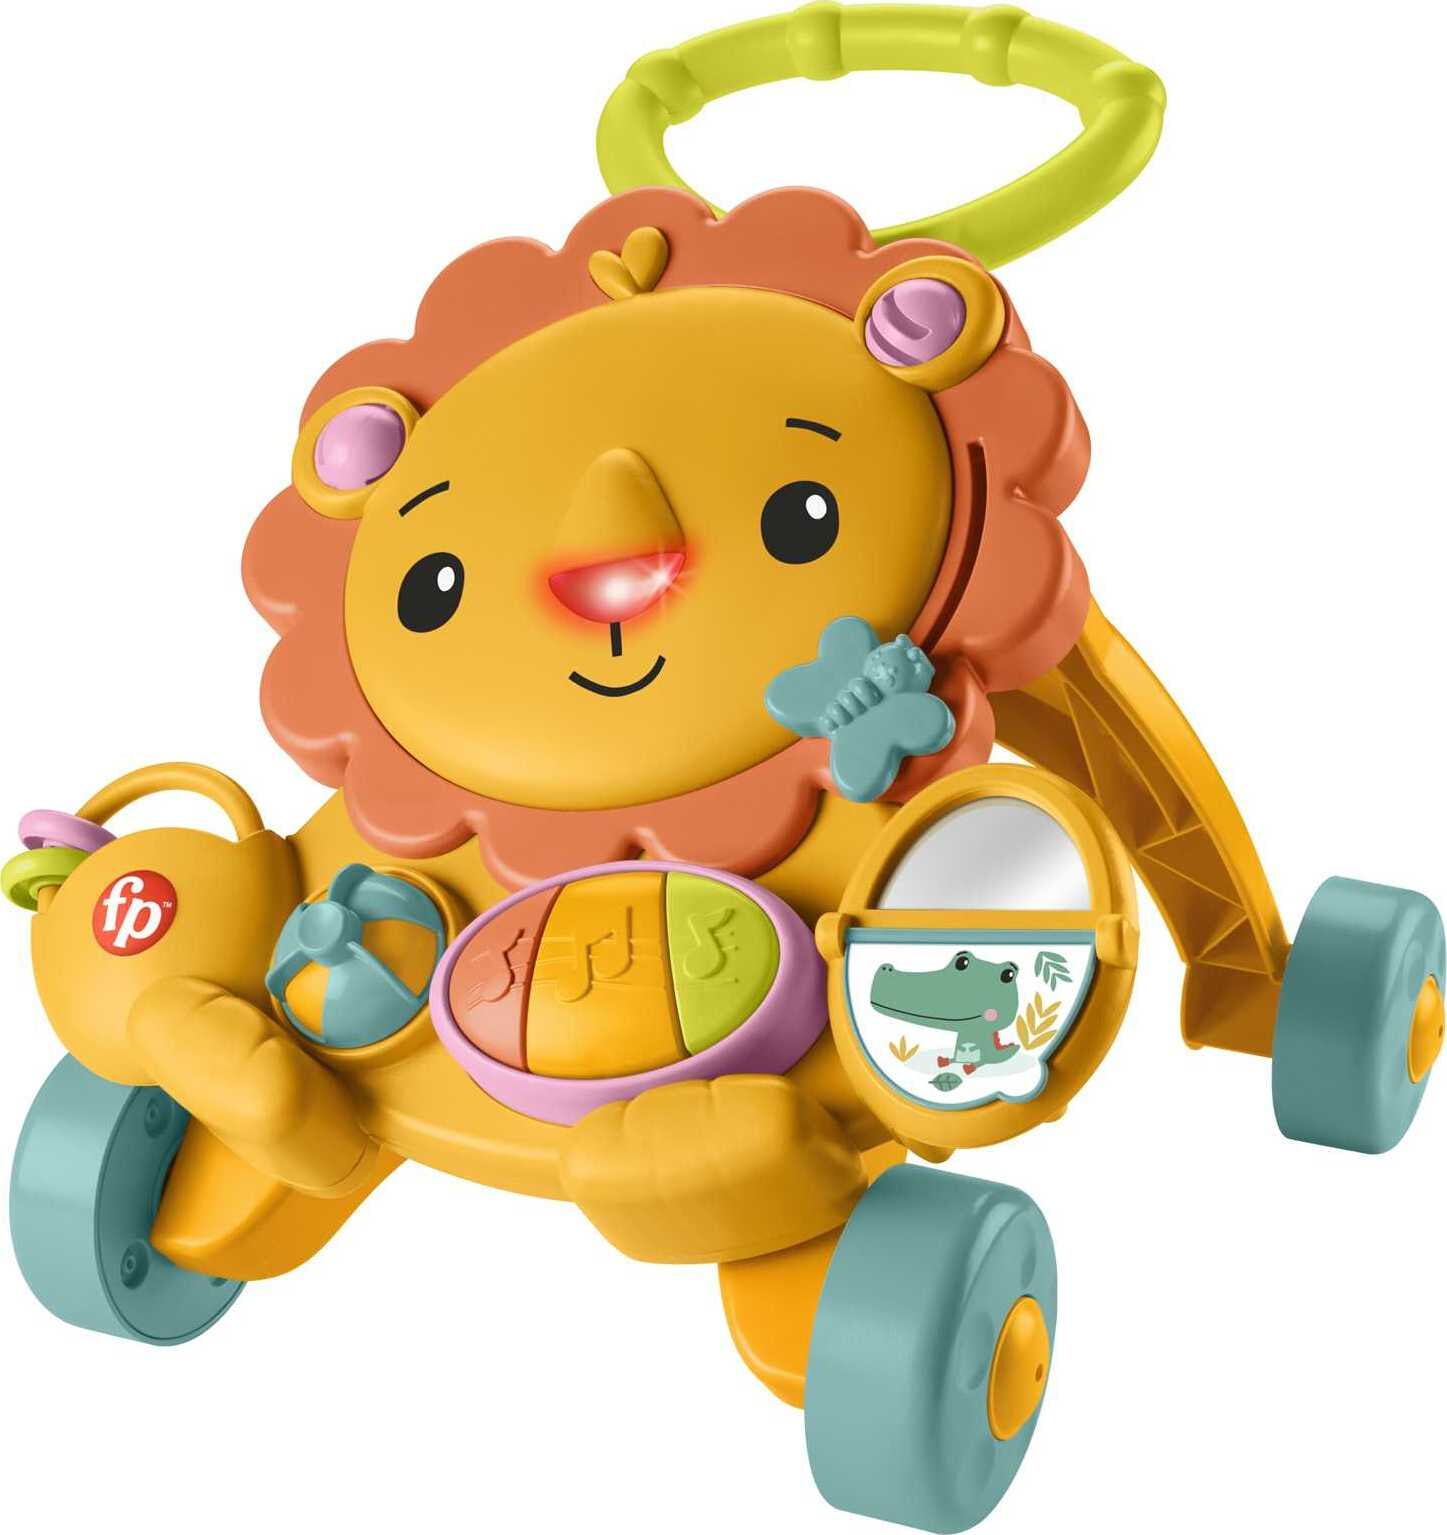 Fisher-Price Musical Lion Walker Infant Toy with Lights and Sounds for Ages 6+ Months